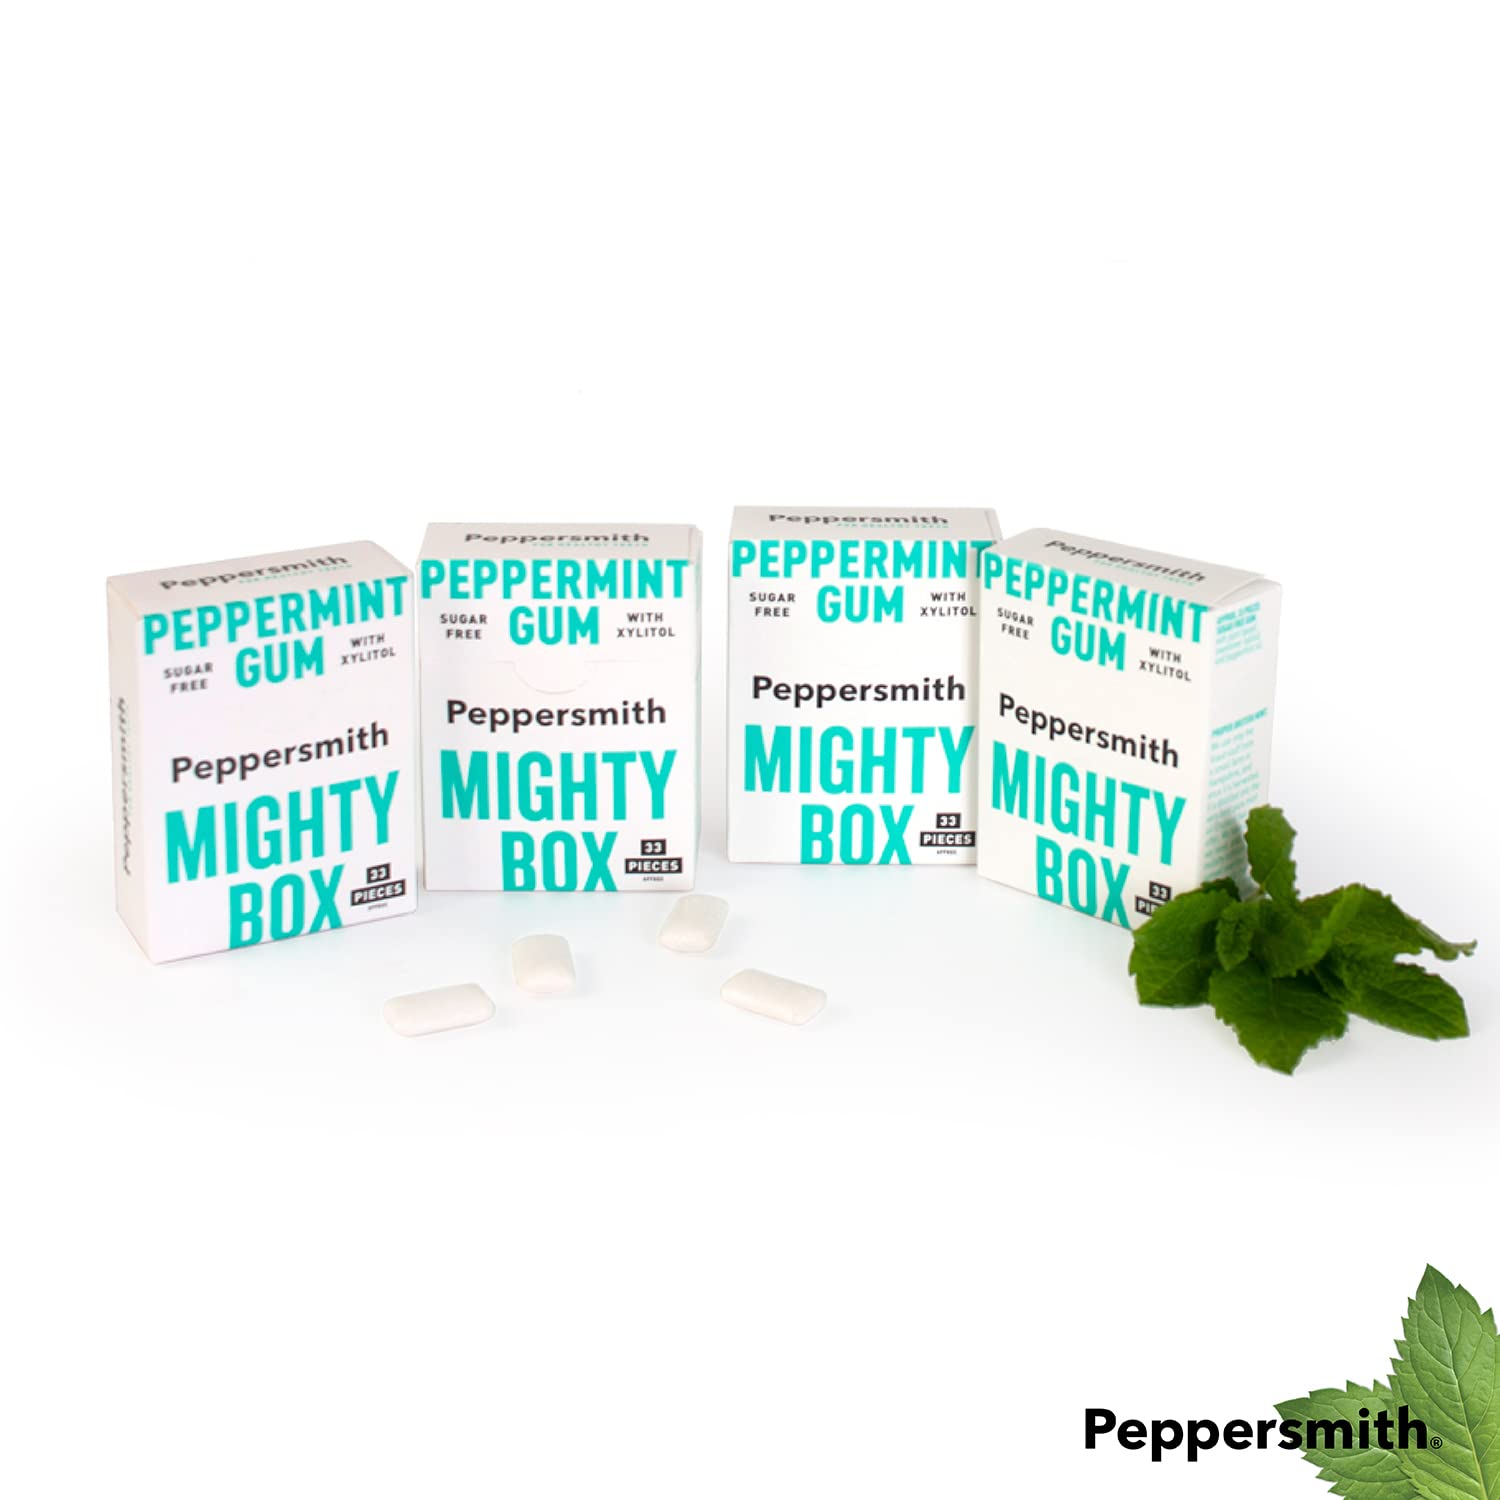 English Peppermint Xylitol Gum 50g Mighty Box